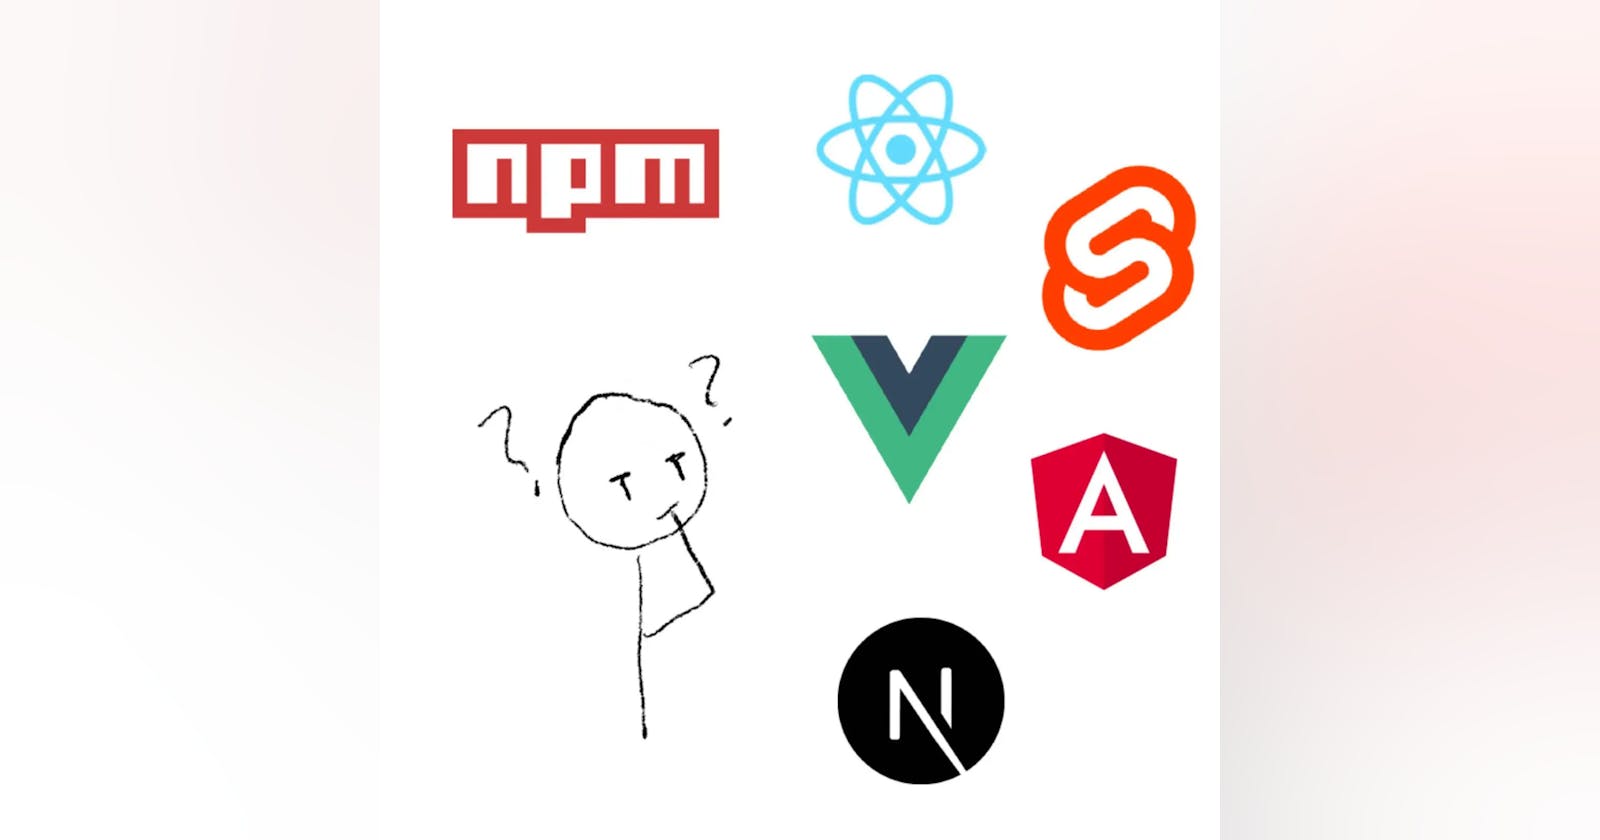 How to Pick the Best NPM Packages